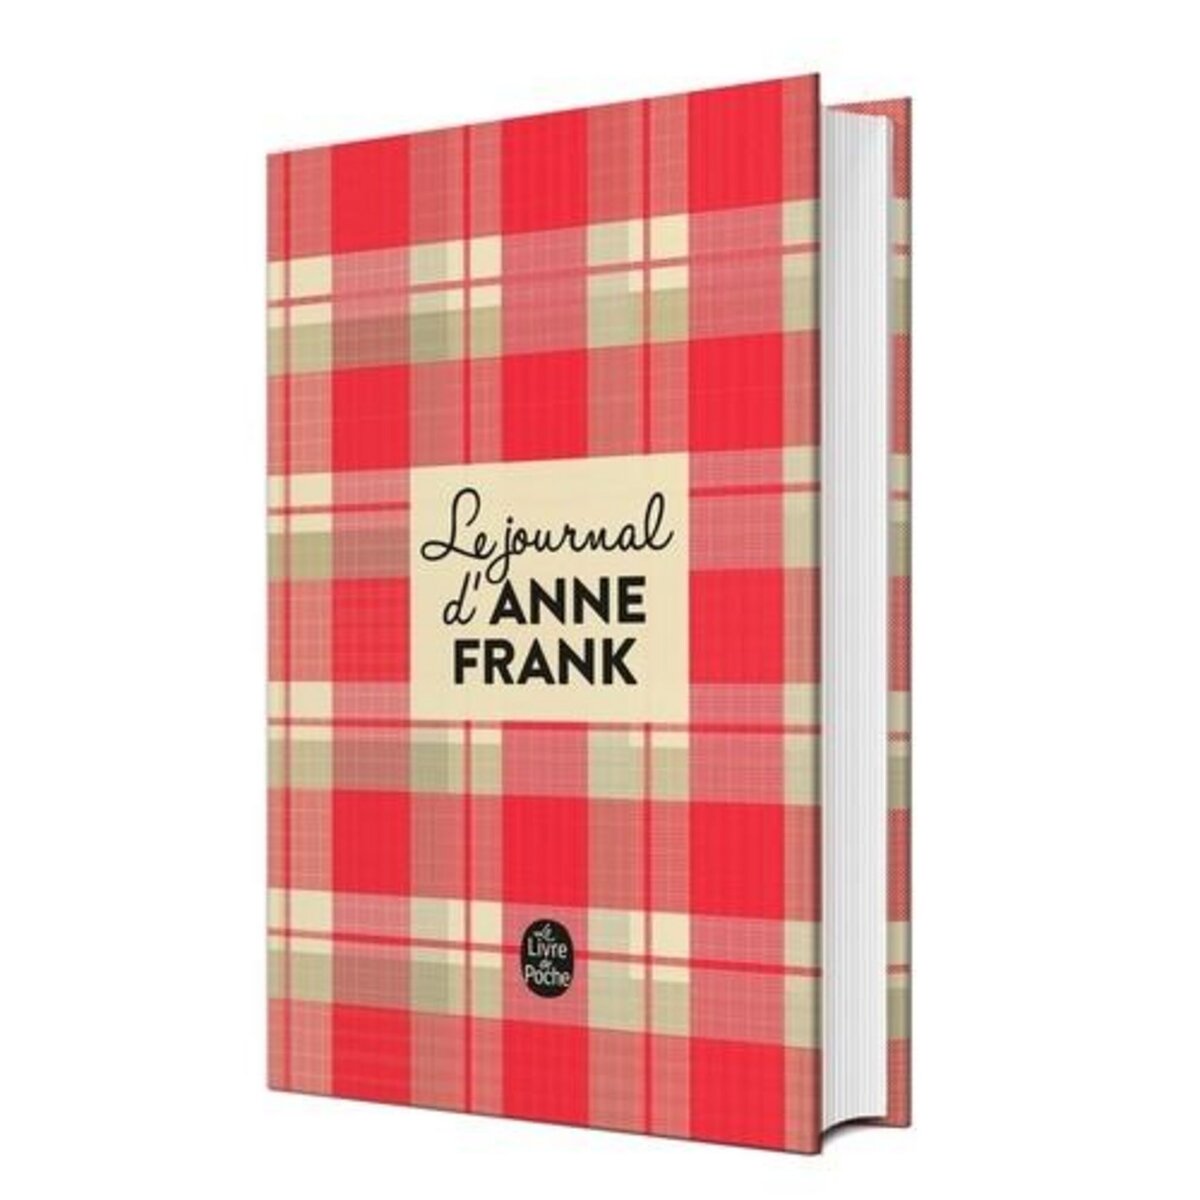  LE JOURNAL D'ANNE FRANK. EDITION COLLECTOR, Frank Anne